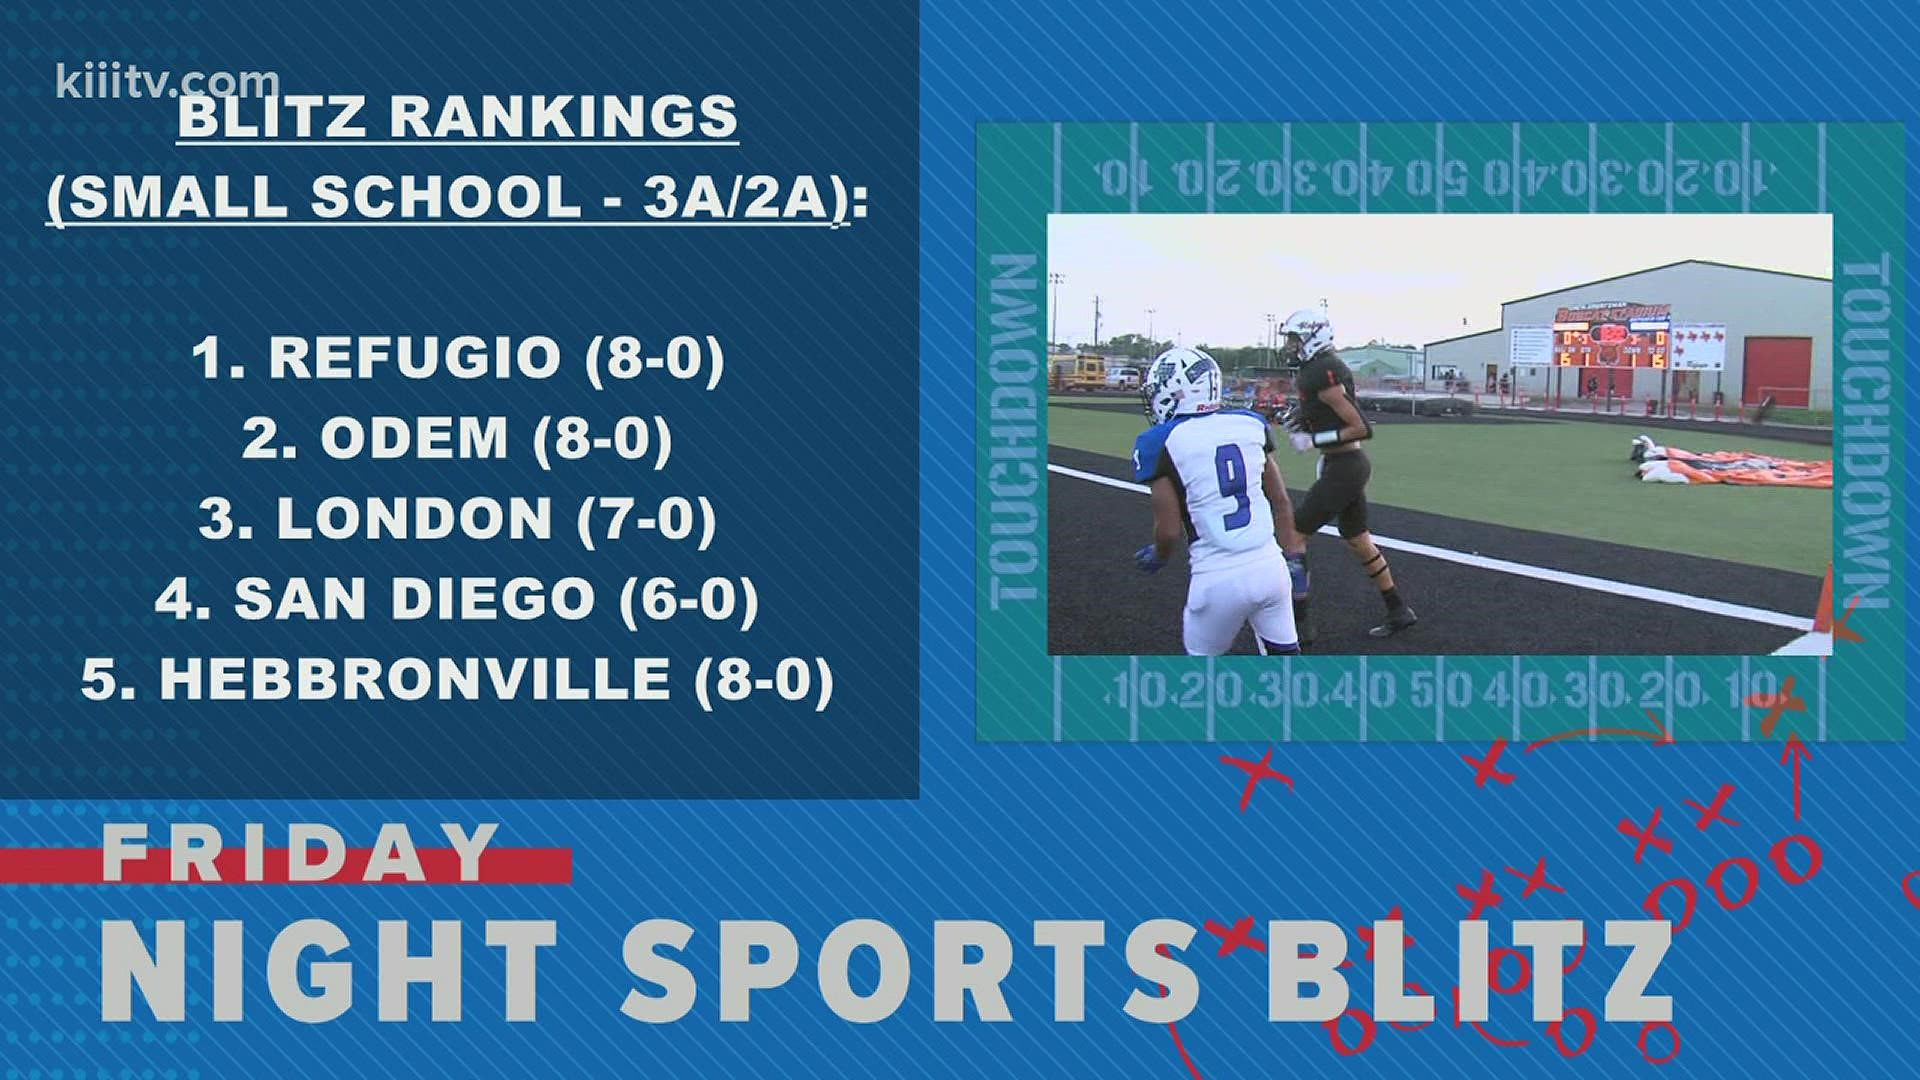 G-P enters into the rankings for the first time in 2021 while the small schools all remain the same and unbeaten.